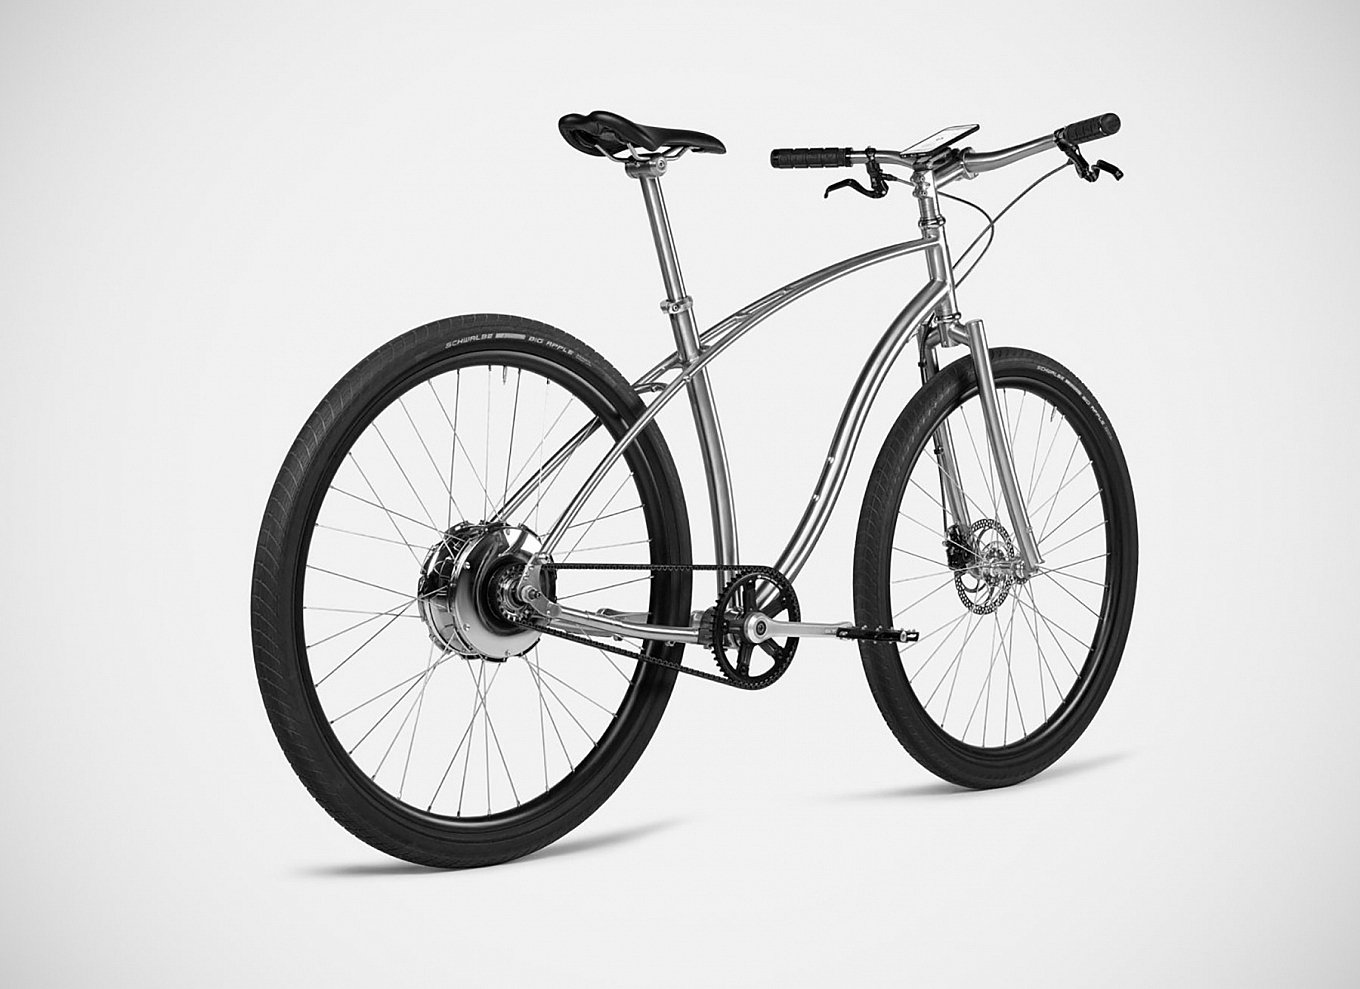 budnitz-model-e-the-worlds-lightest-electric-bicycle-8